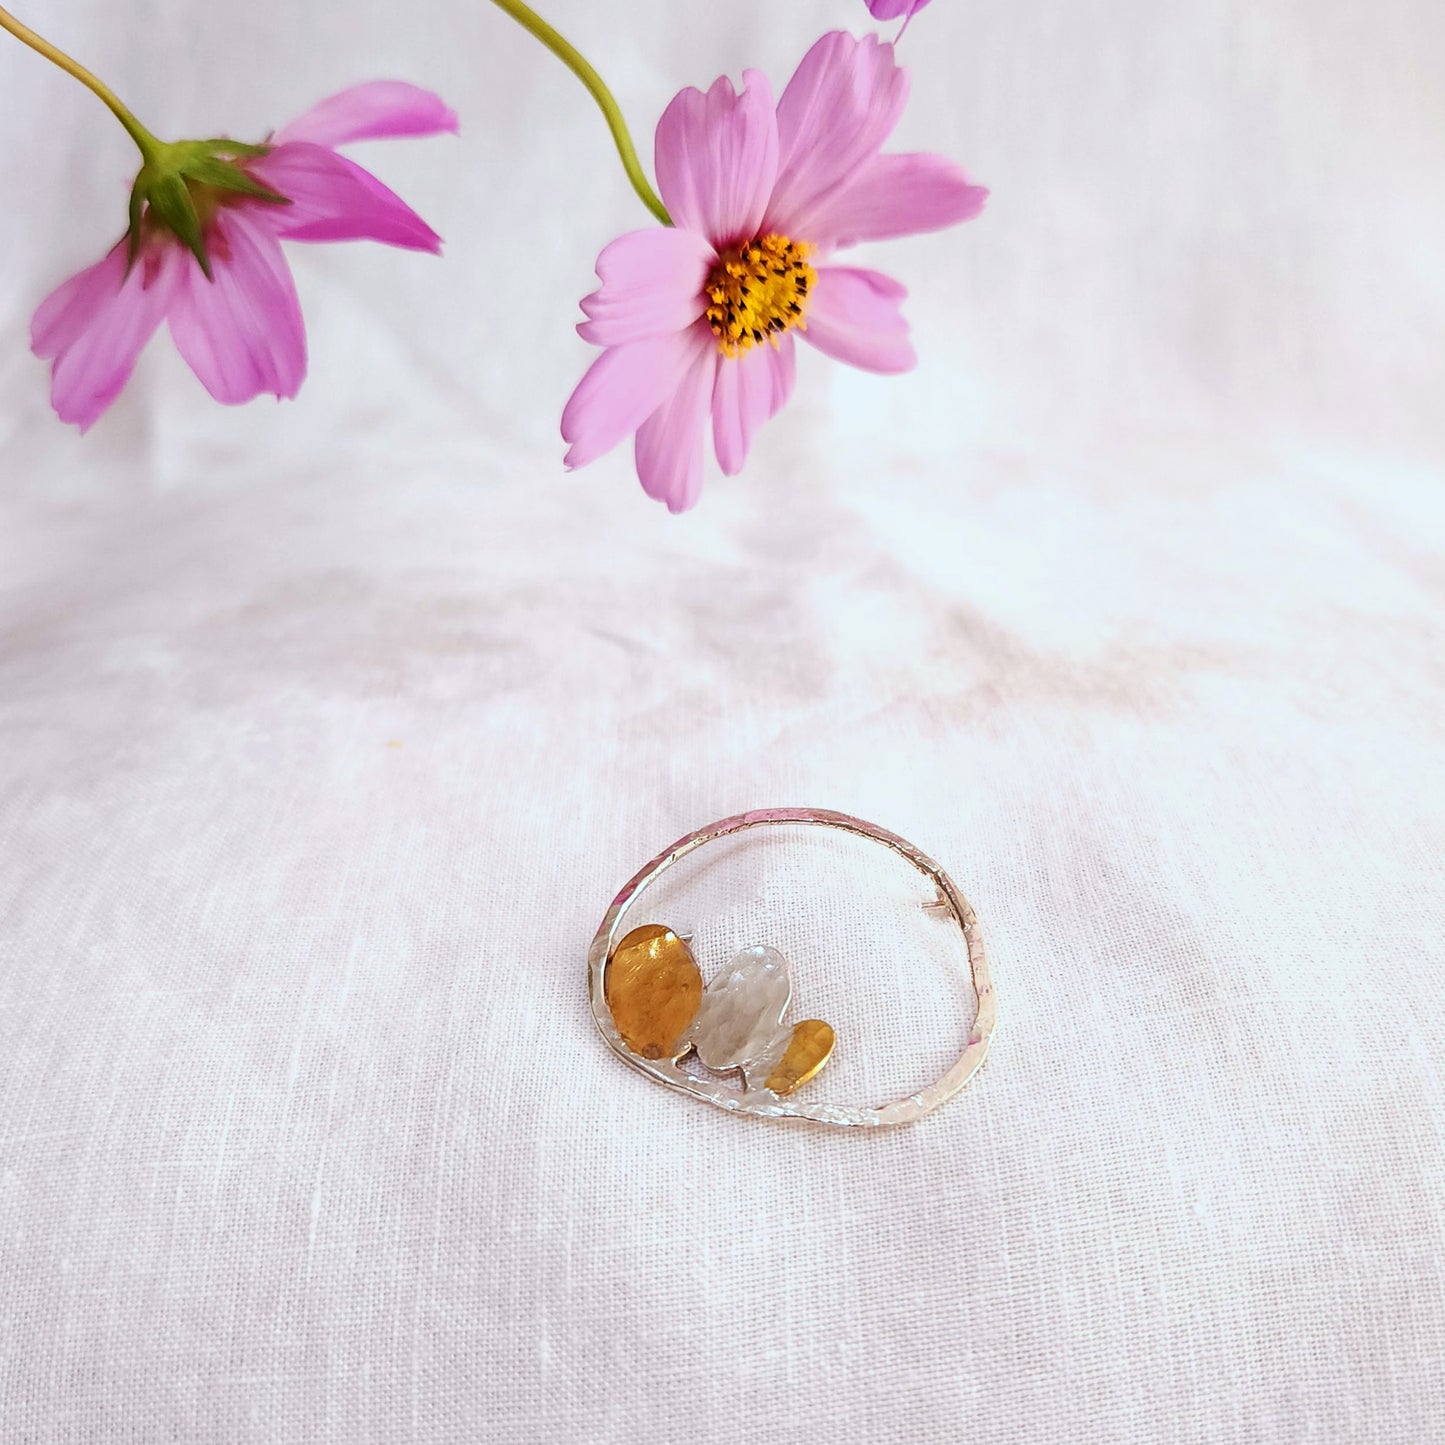 Handcrafted brooch with tiny petals